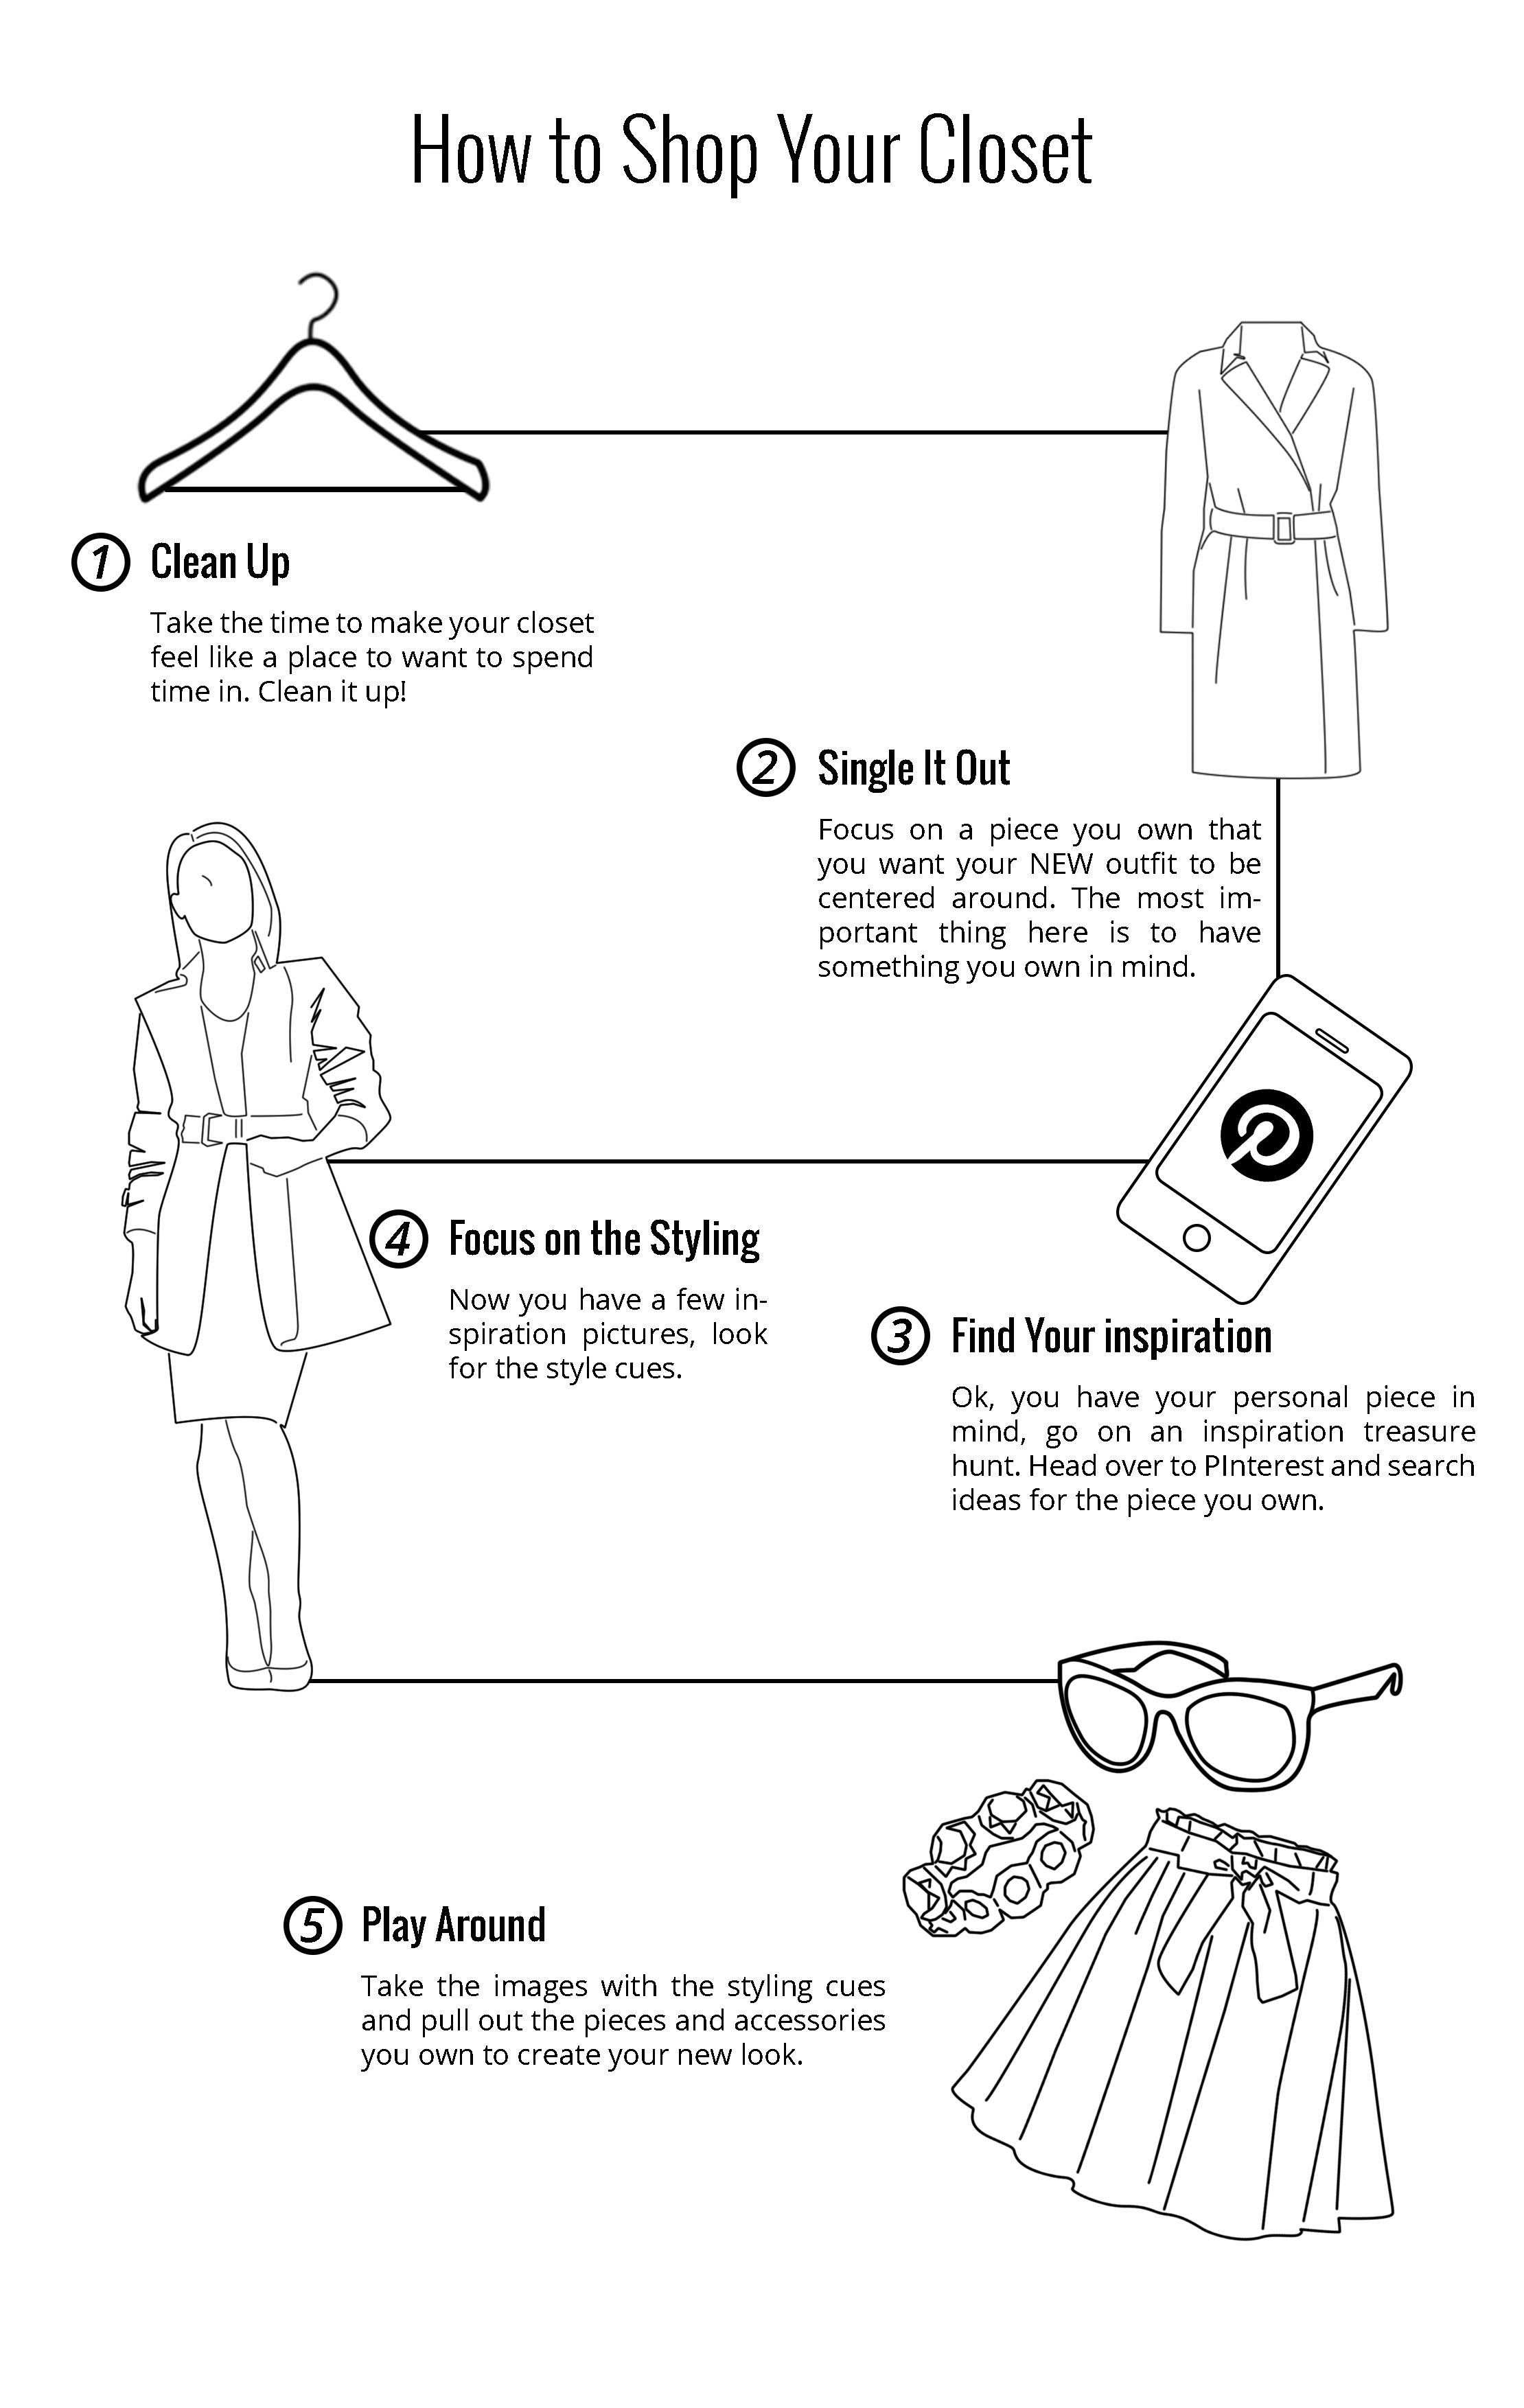 How To Shop Your Closet — Polishing Up